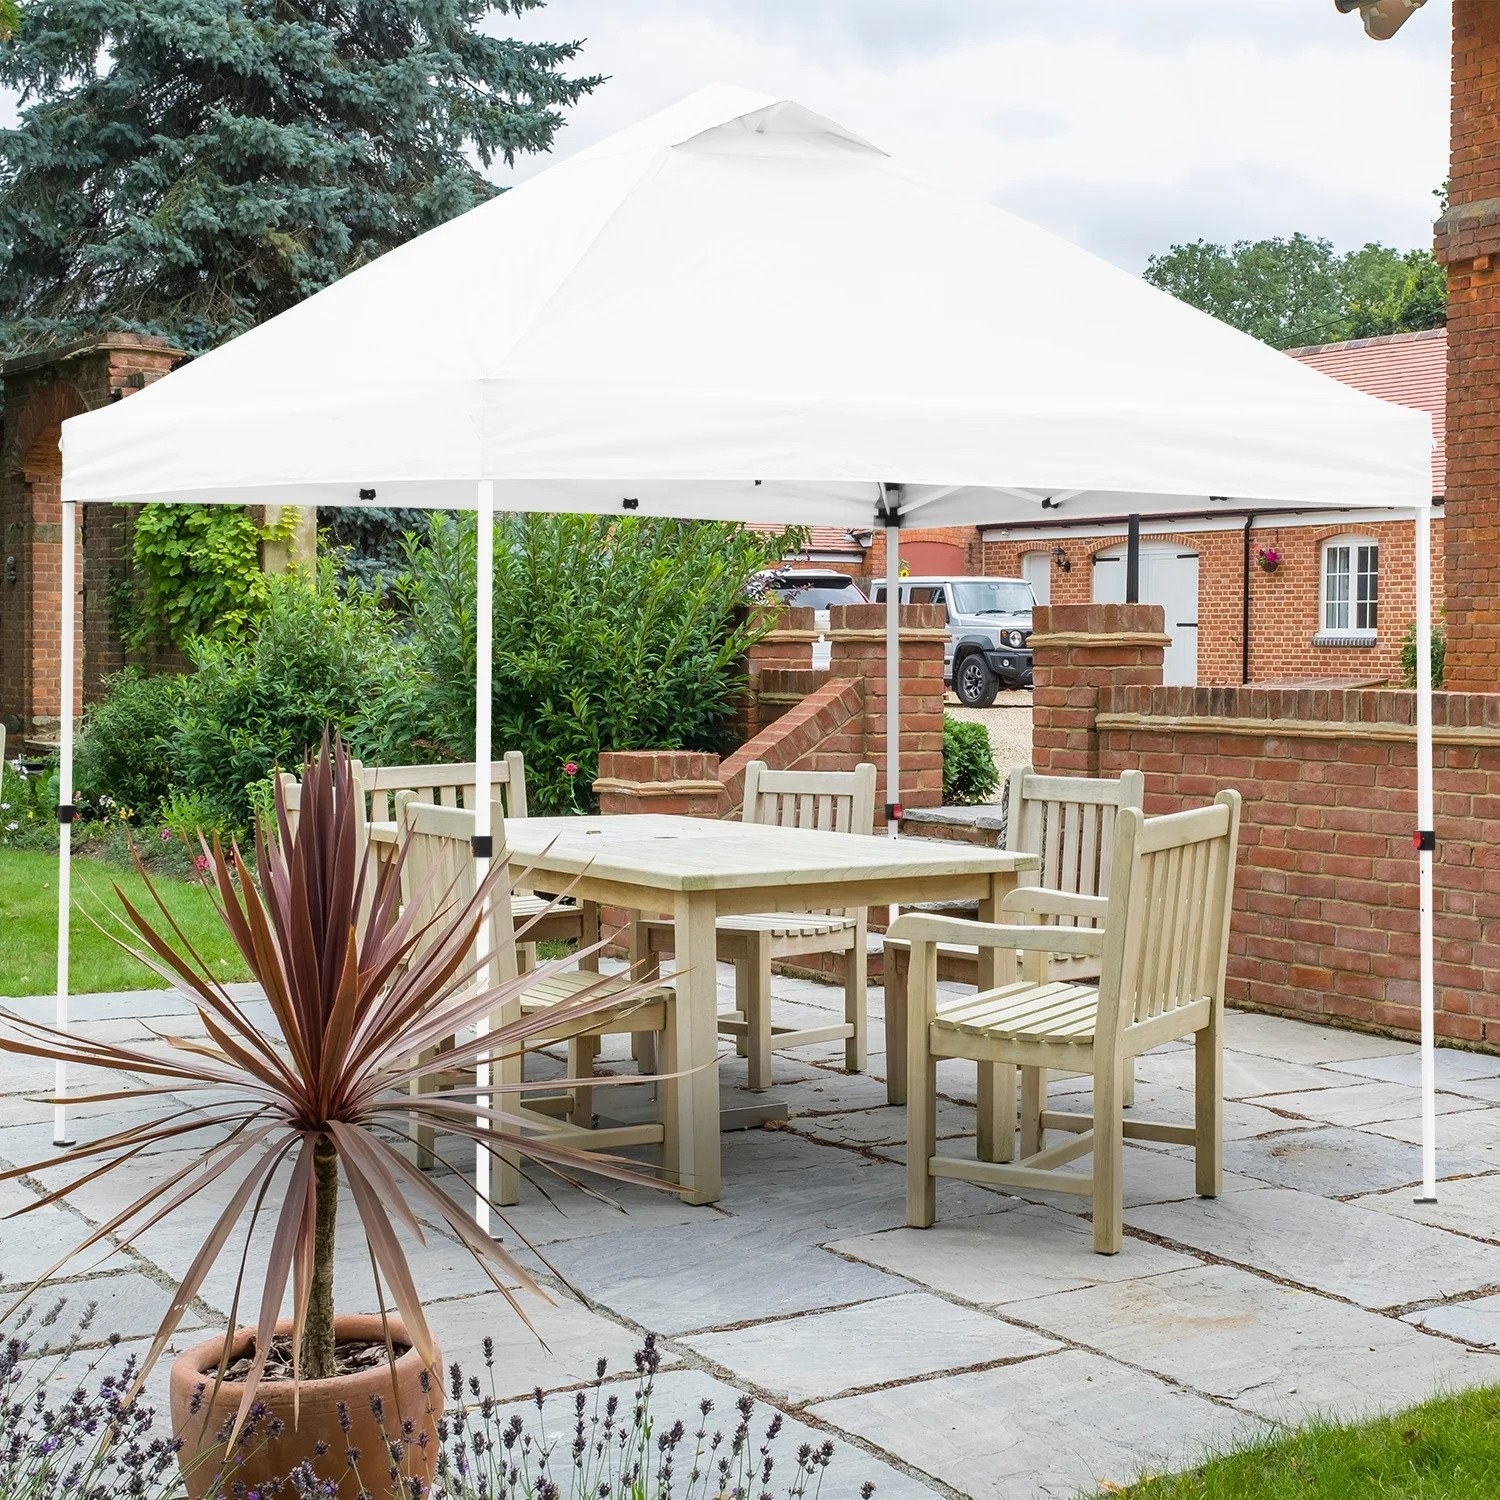 The white vented steel frame pop-up canopy